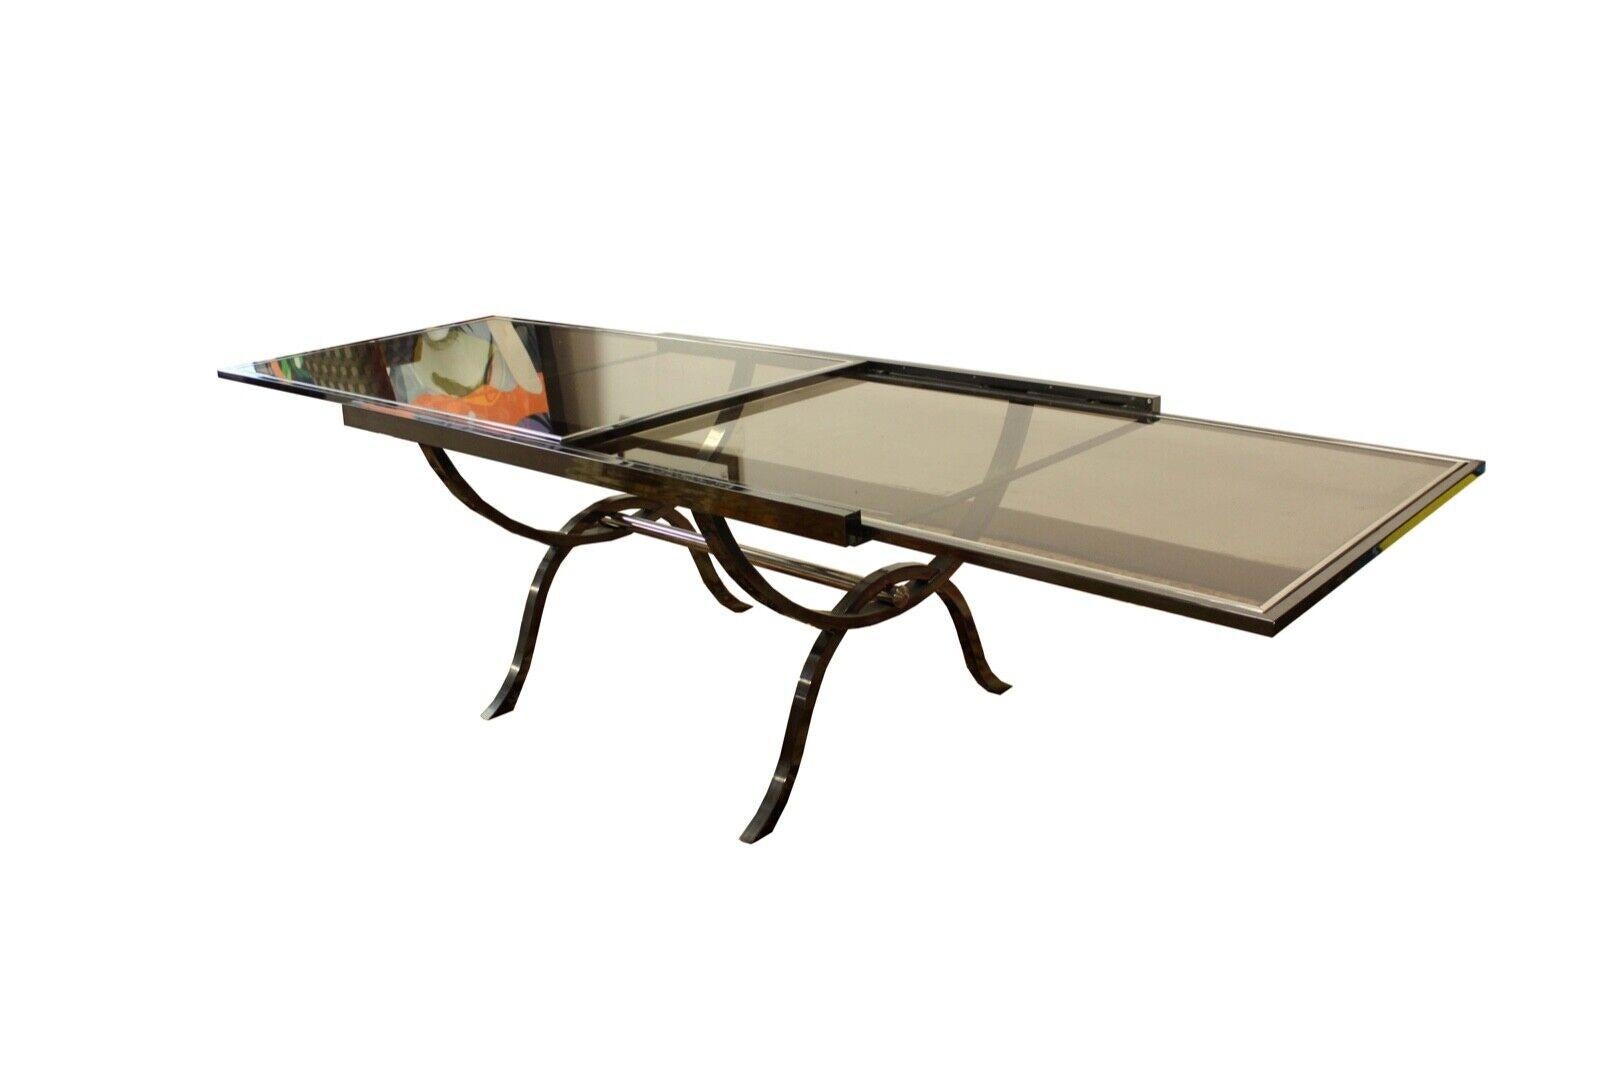 Late 20th Century Mid-Century Modern Dia Chrome and Smoked Glass Expandable Table